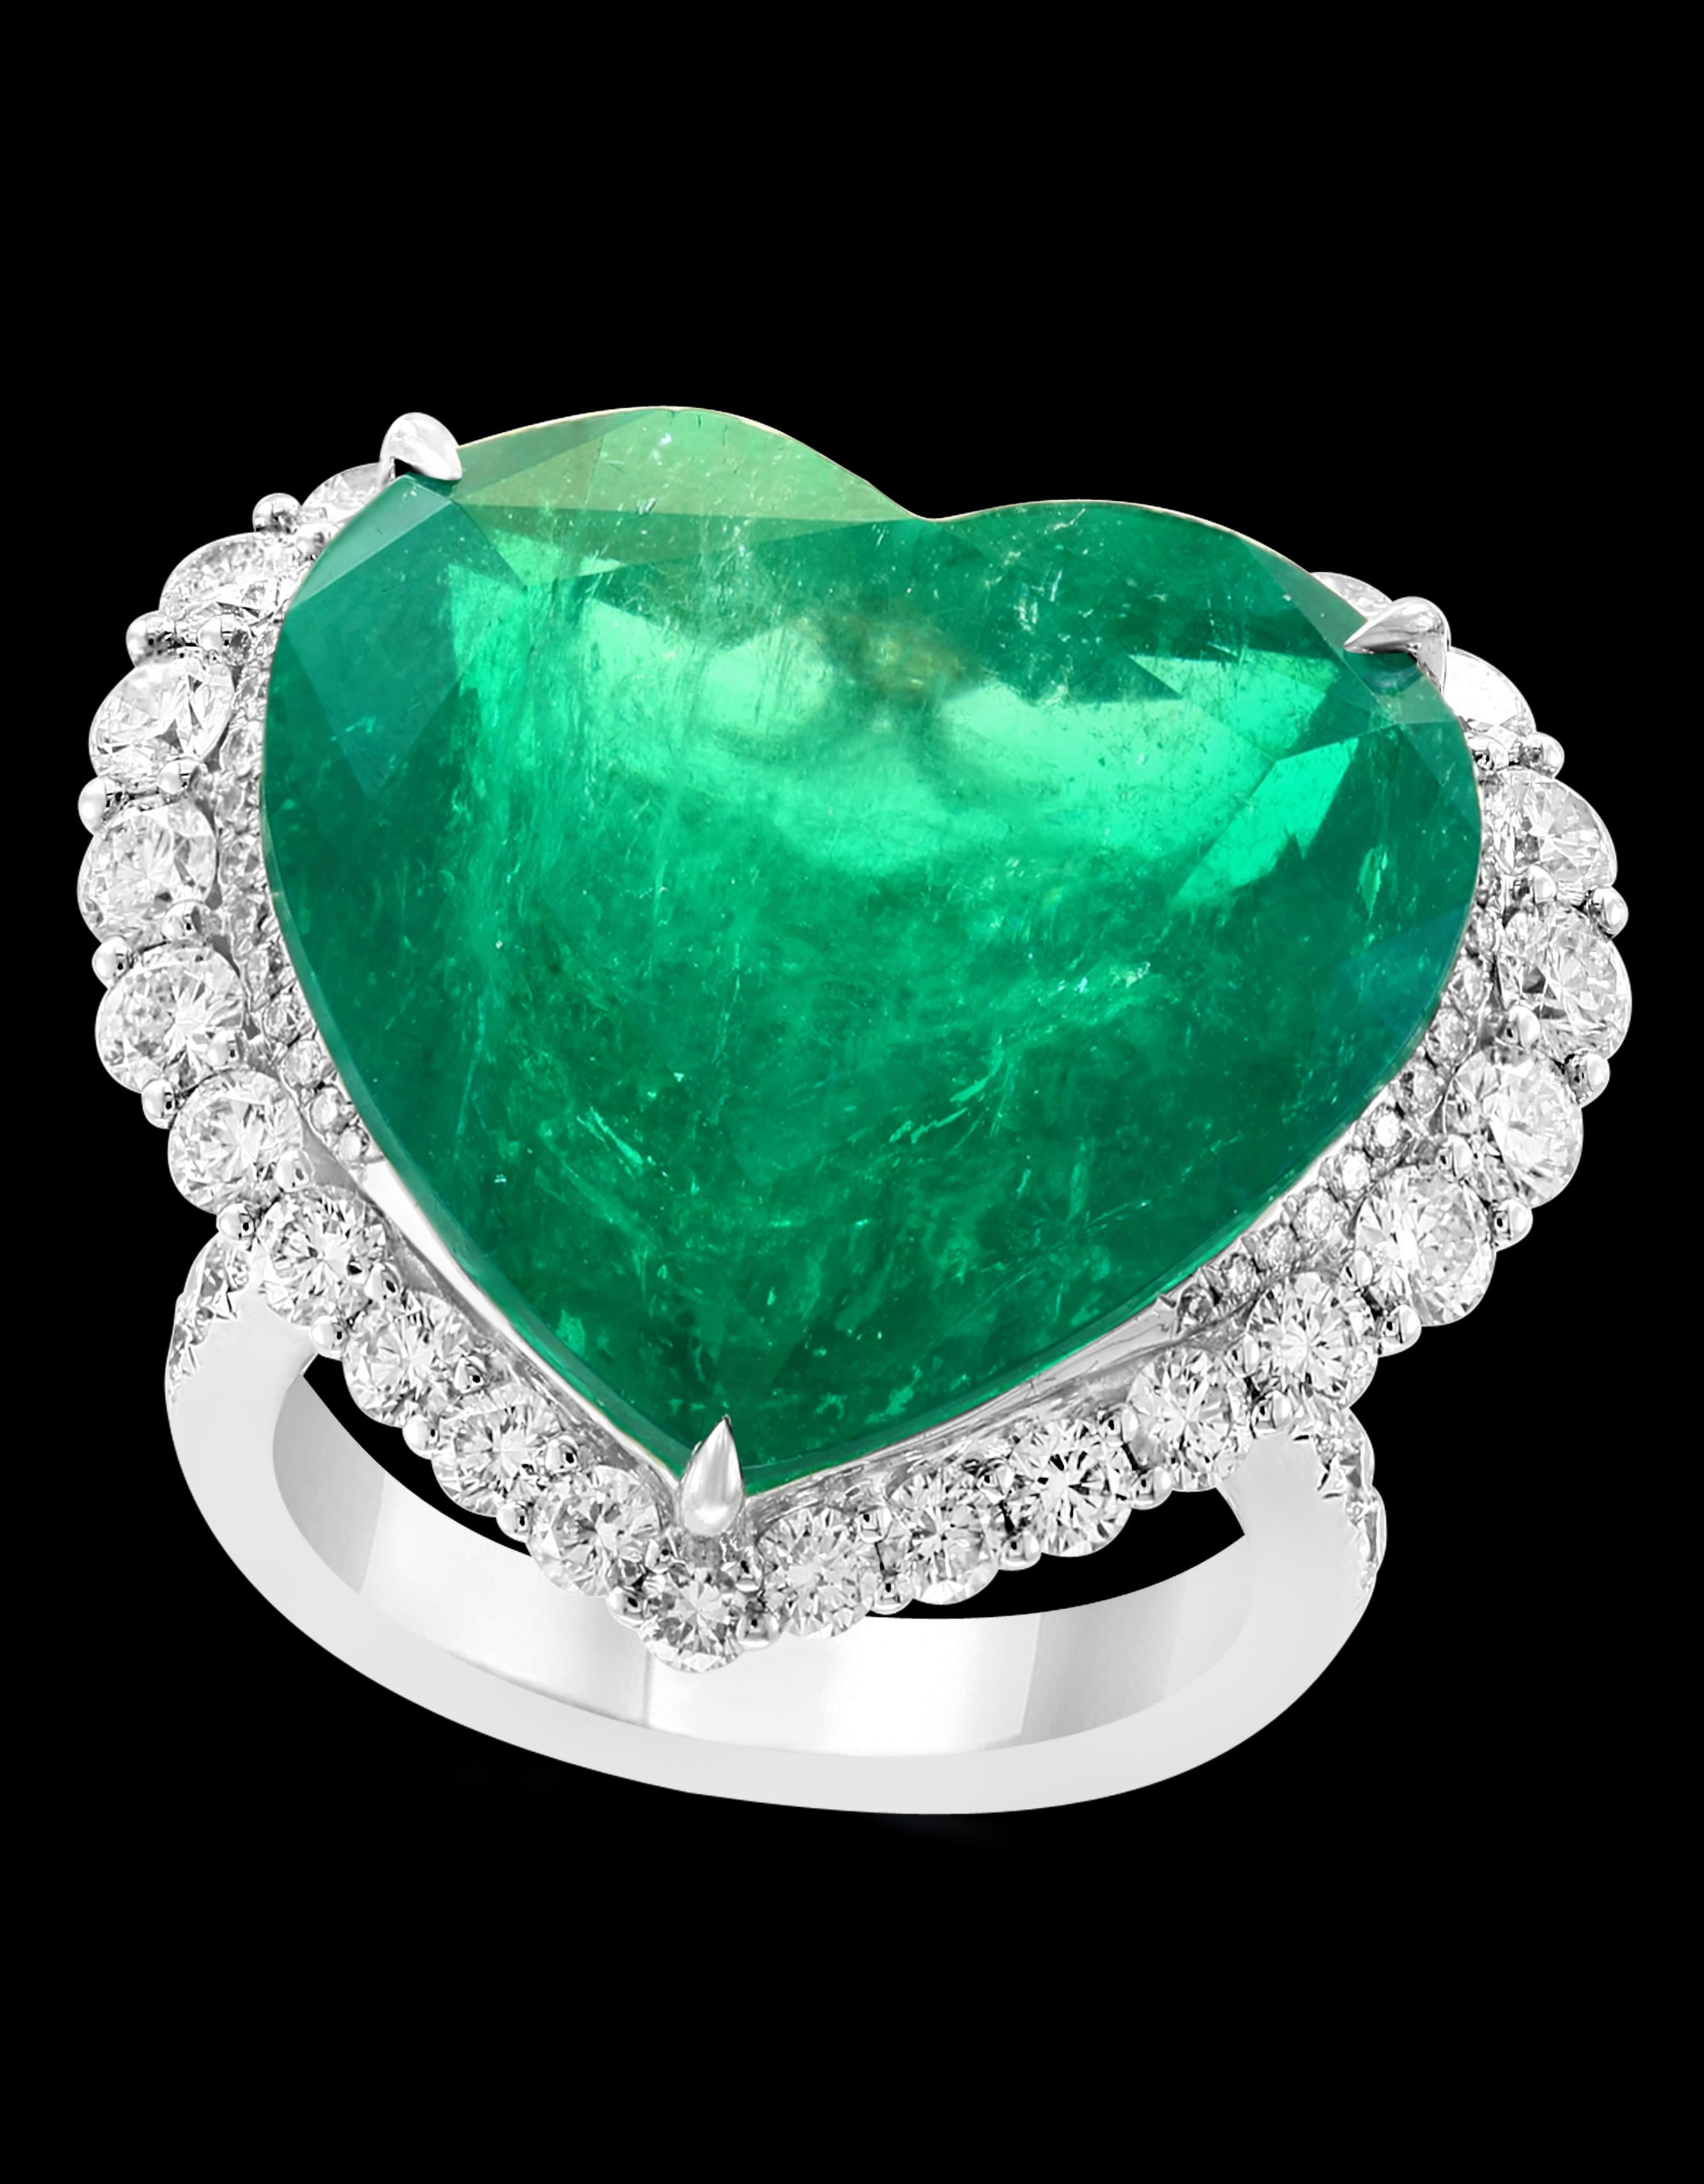 AGL Certified Minor 23+ Ct Heart Shape  Colombian Emerald & Diamond 18 Kt Ring 
23.08  Carat Heart Shape Colombian Emerald And Diamond 18 Karat Gold  Ring Estate classic, cocktail ring . One of the rare piece as the emerald is very large and  very